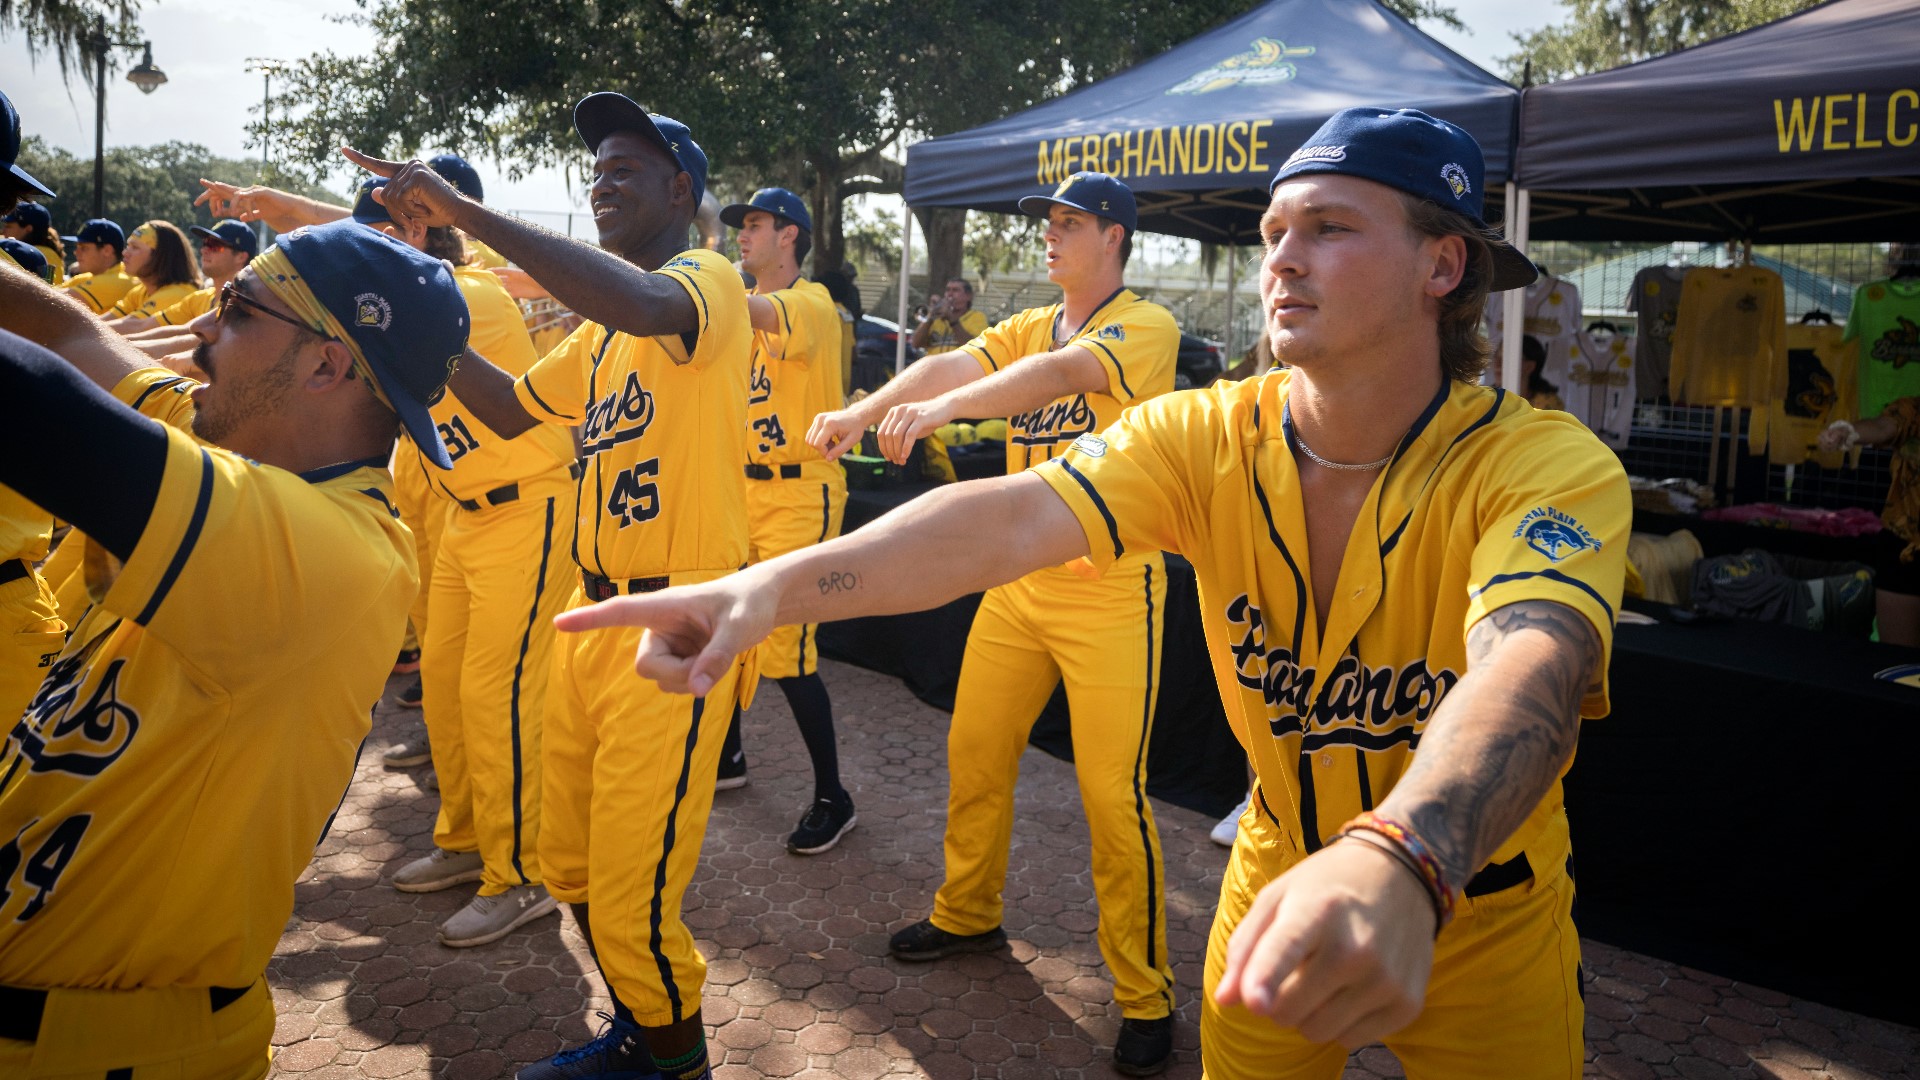 The baseball team known for their viral antics on the field are taking the show on the road with their 2023 Banana Ball World Tour.